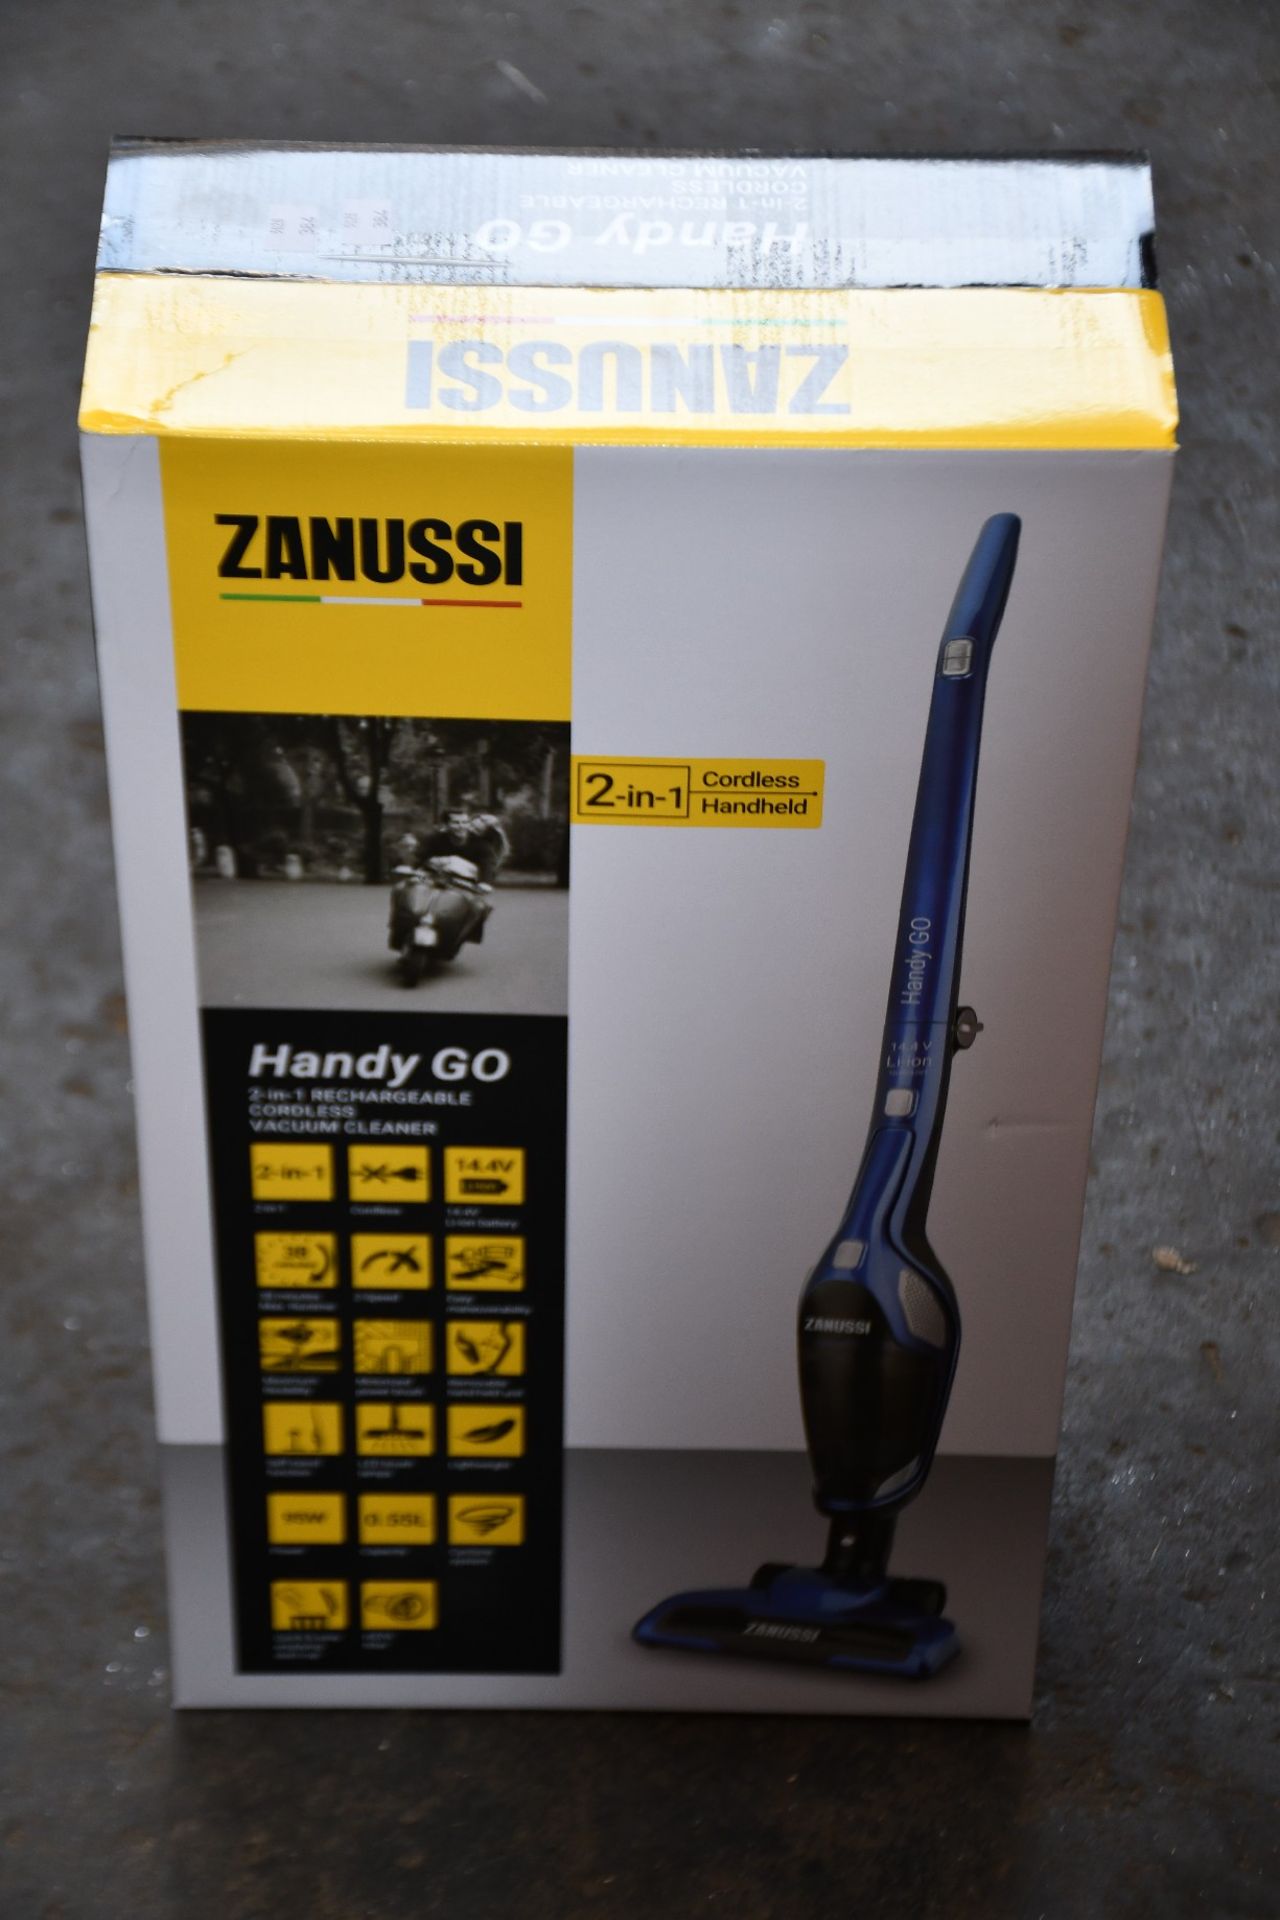 A new Zanussi Blue Handy Go 2 in 1, 95W, 0.55L rechargeable cordless vacuum cleaner (ZANDX75).